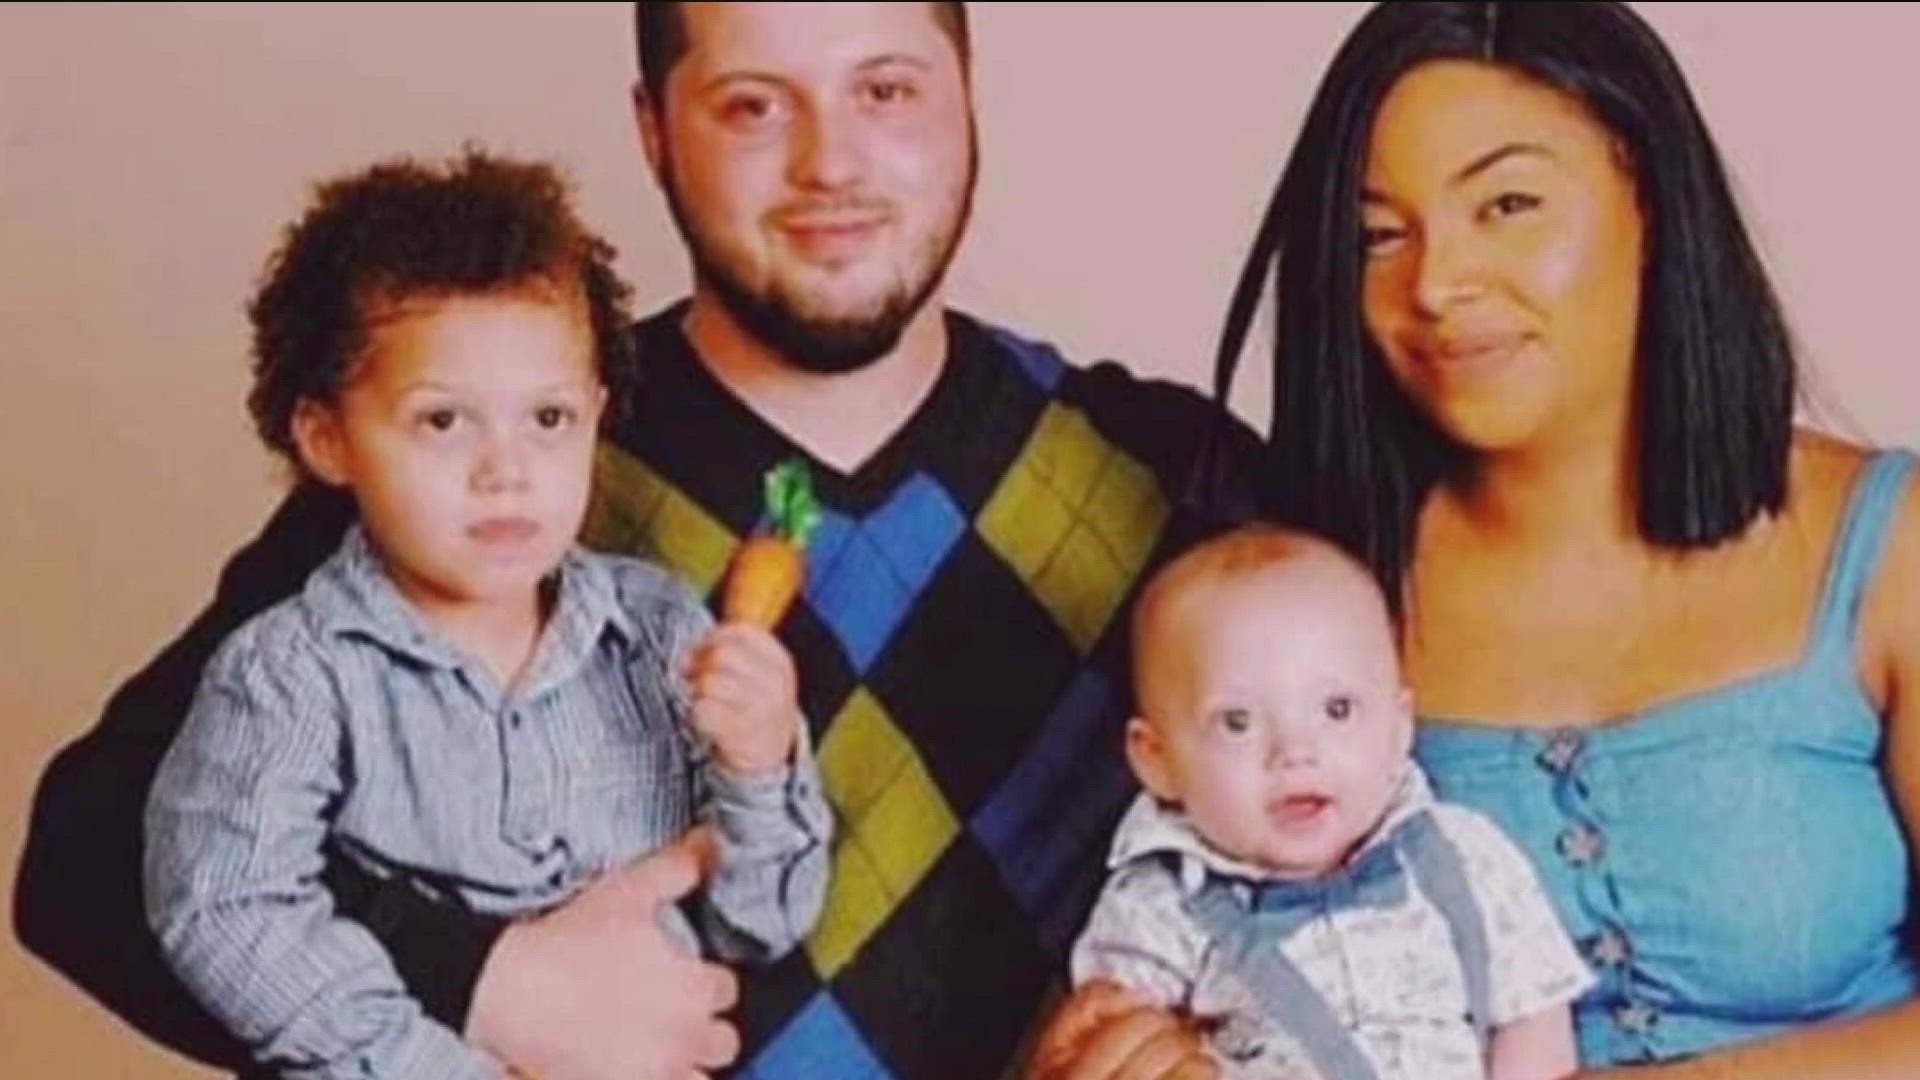 The father of two was shot and killed so another individual could be initiated into a gang.